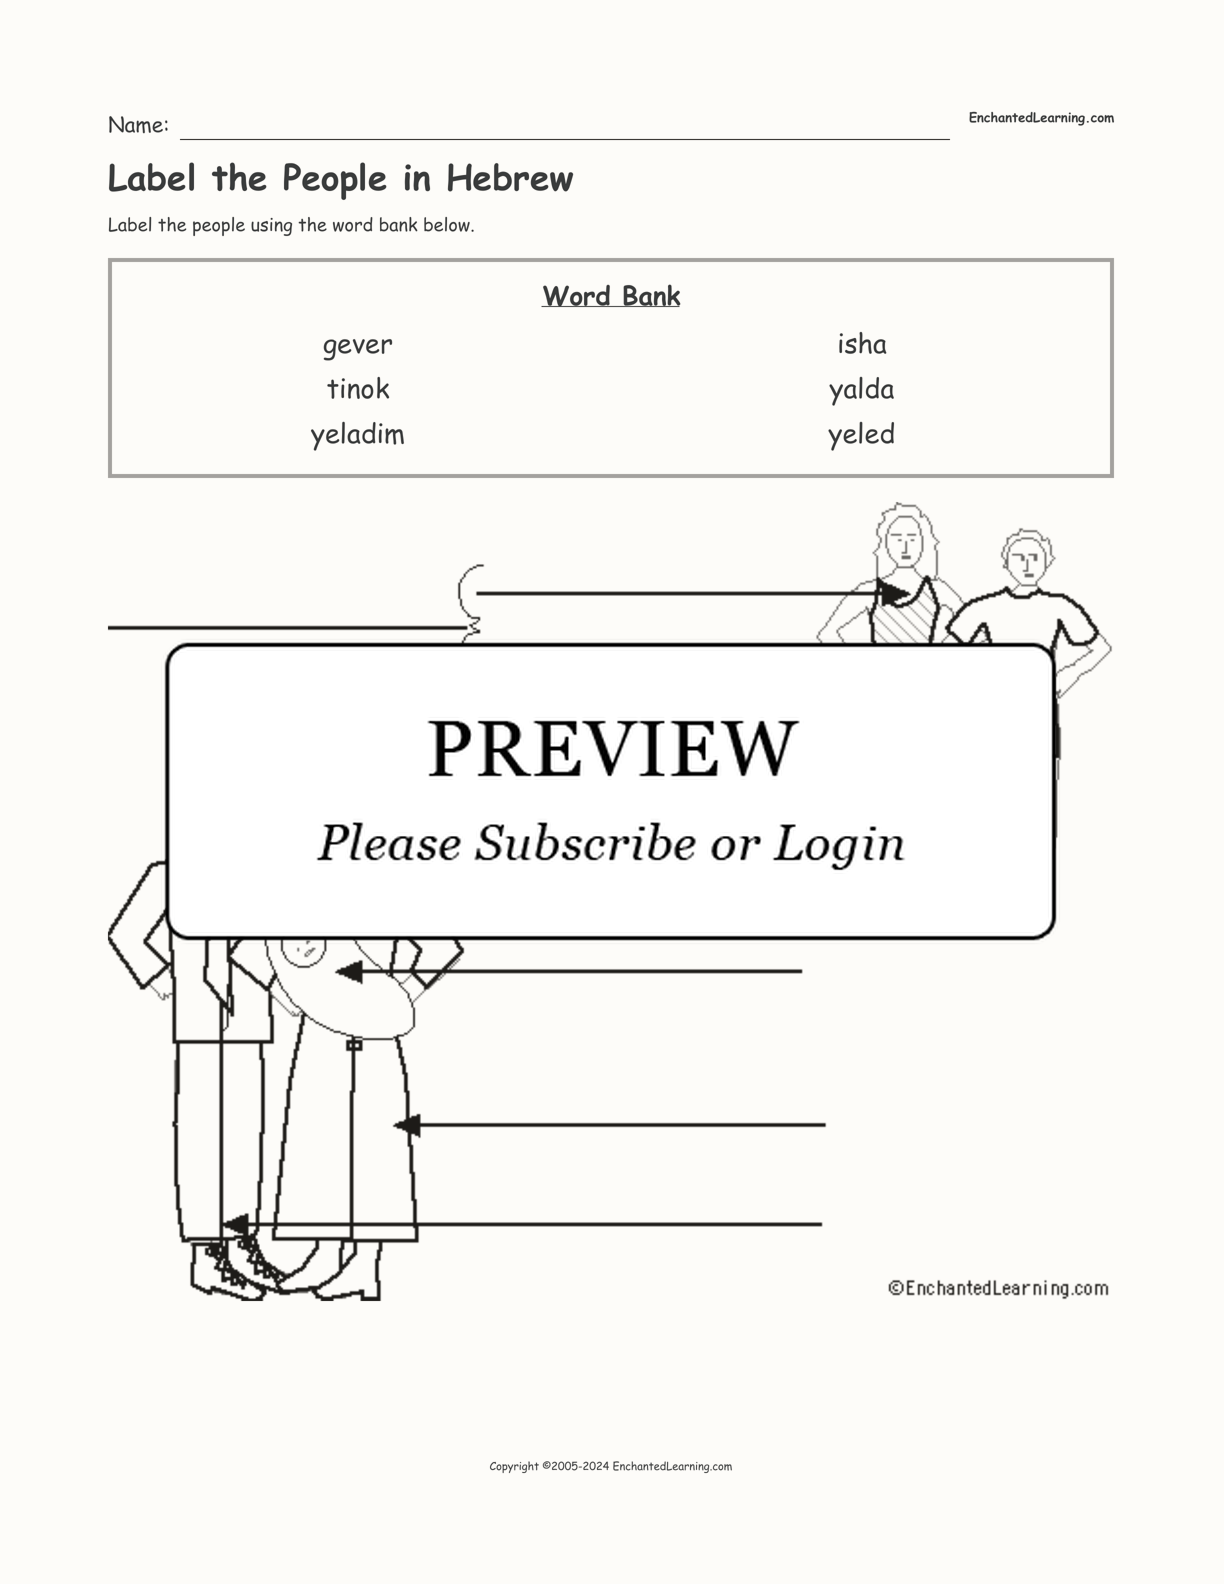 Label the People in Hebrew interactive worksheet page 1